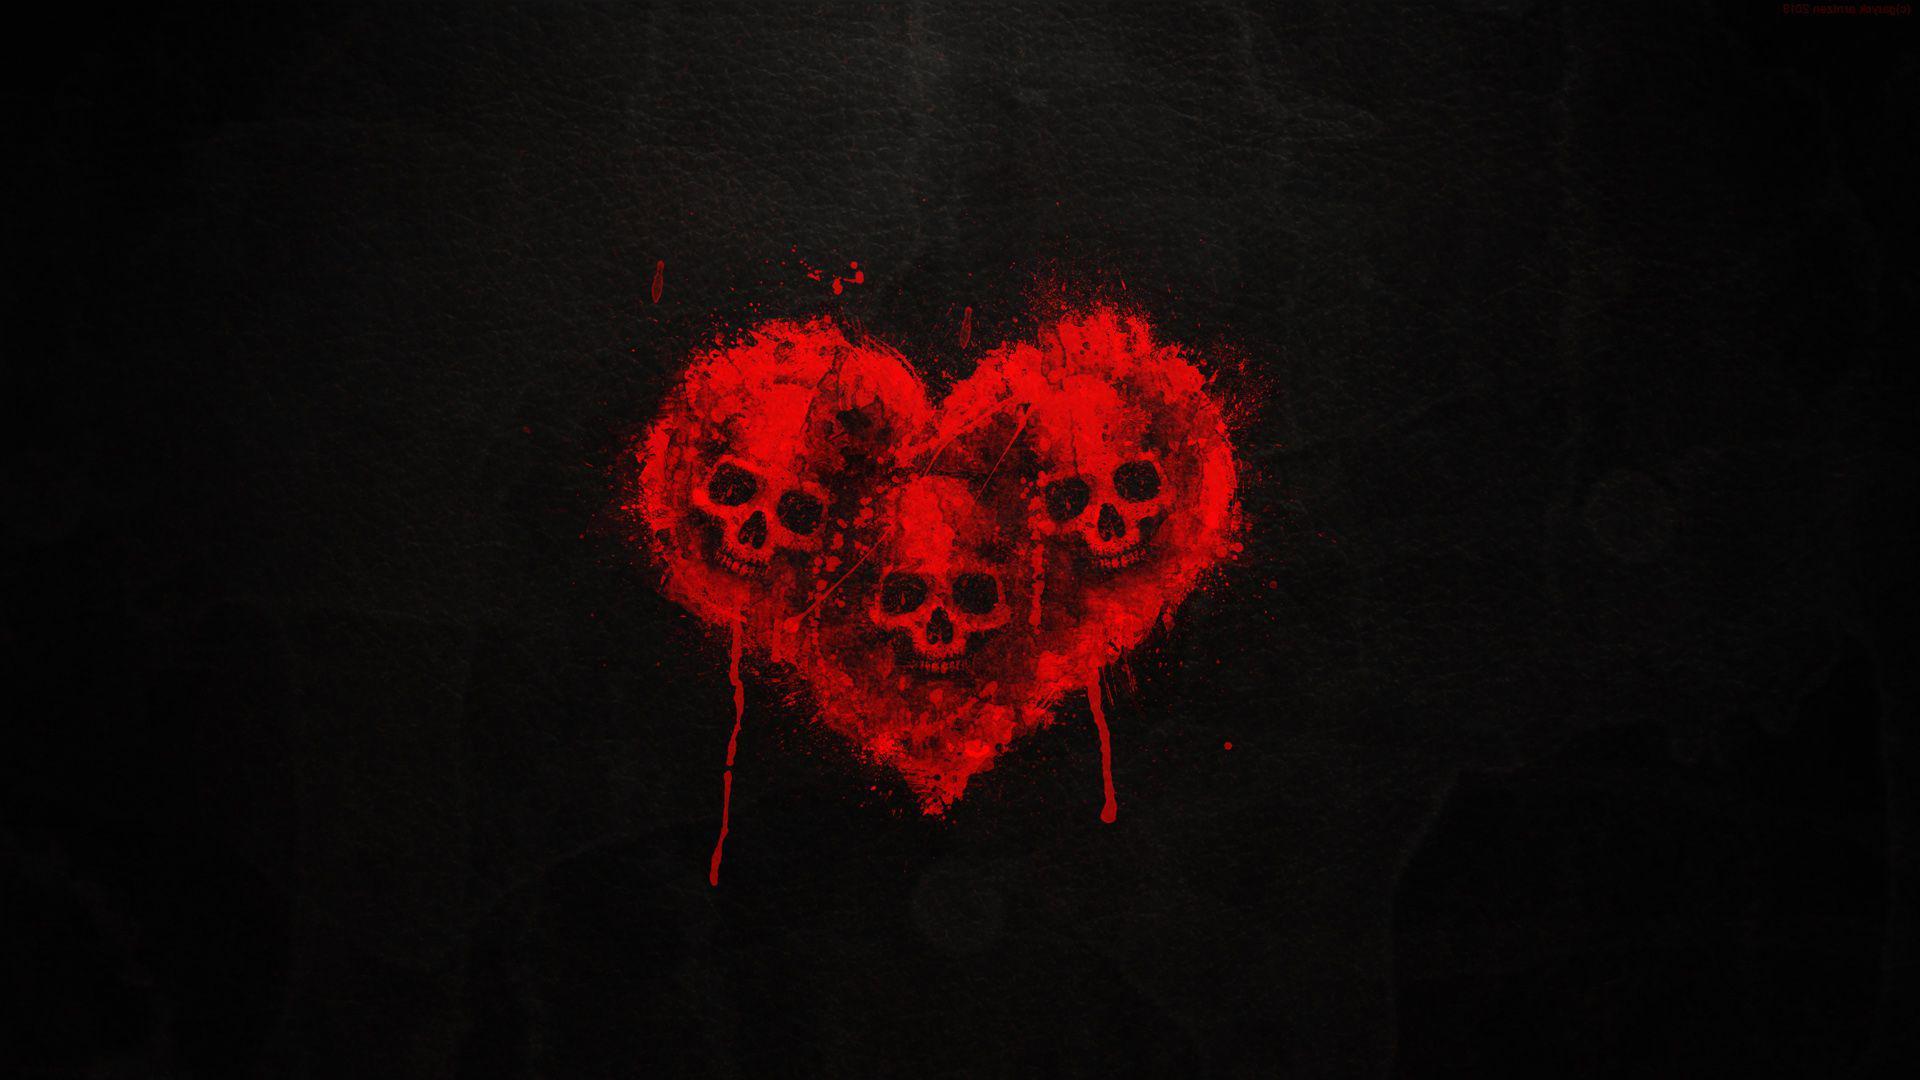 Download wallpaper artistic Heart with tags: Artistic, Cool, Skull, Red, Painting, Heart